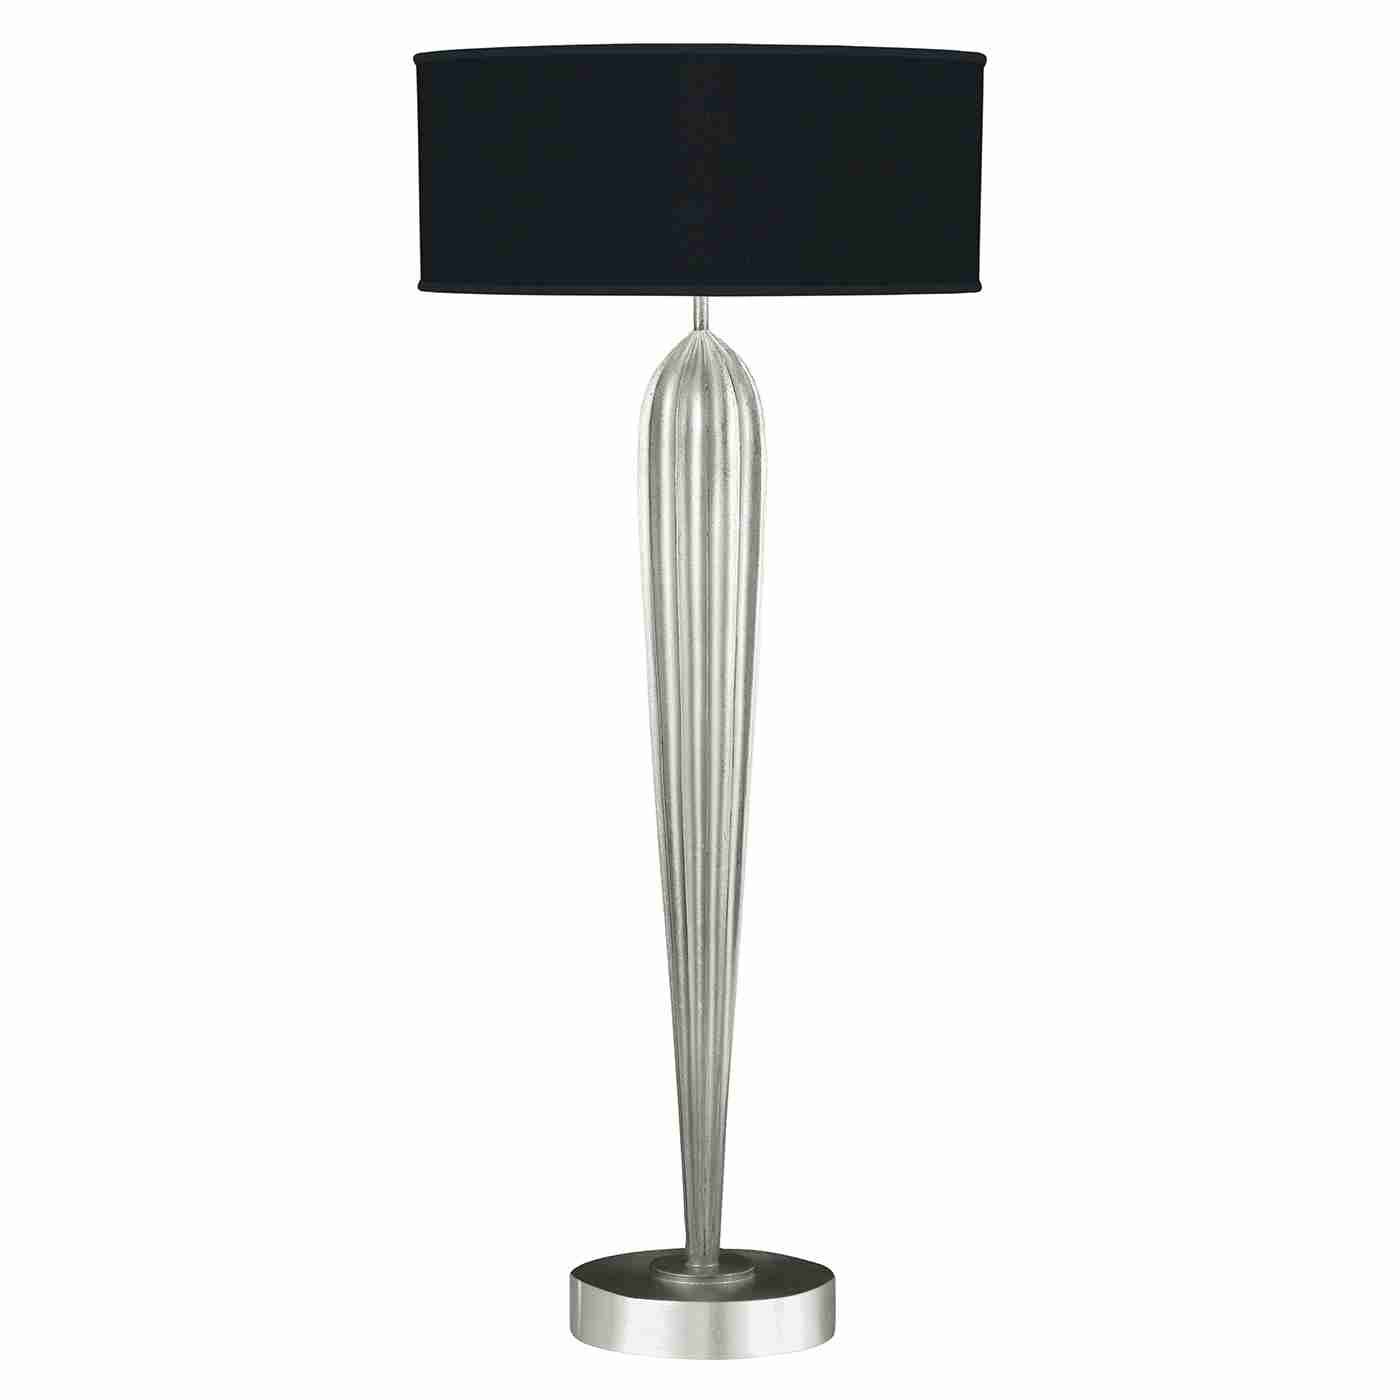 Allegretto Table Lamp Silver Leaf with Black Shade